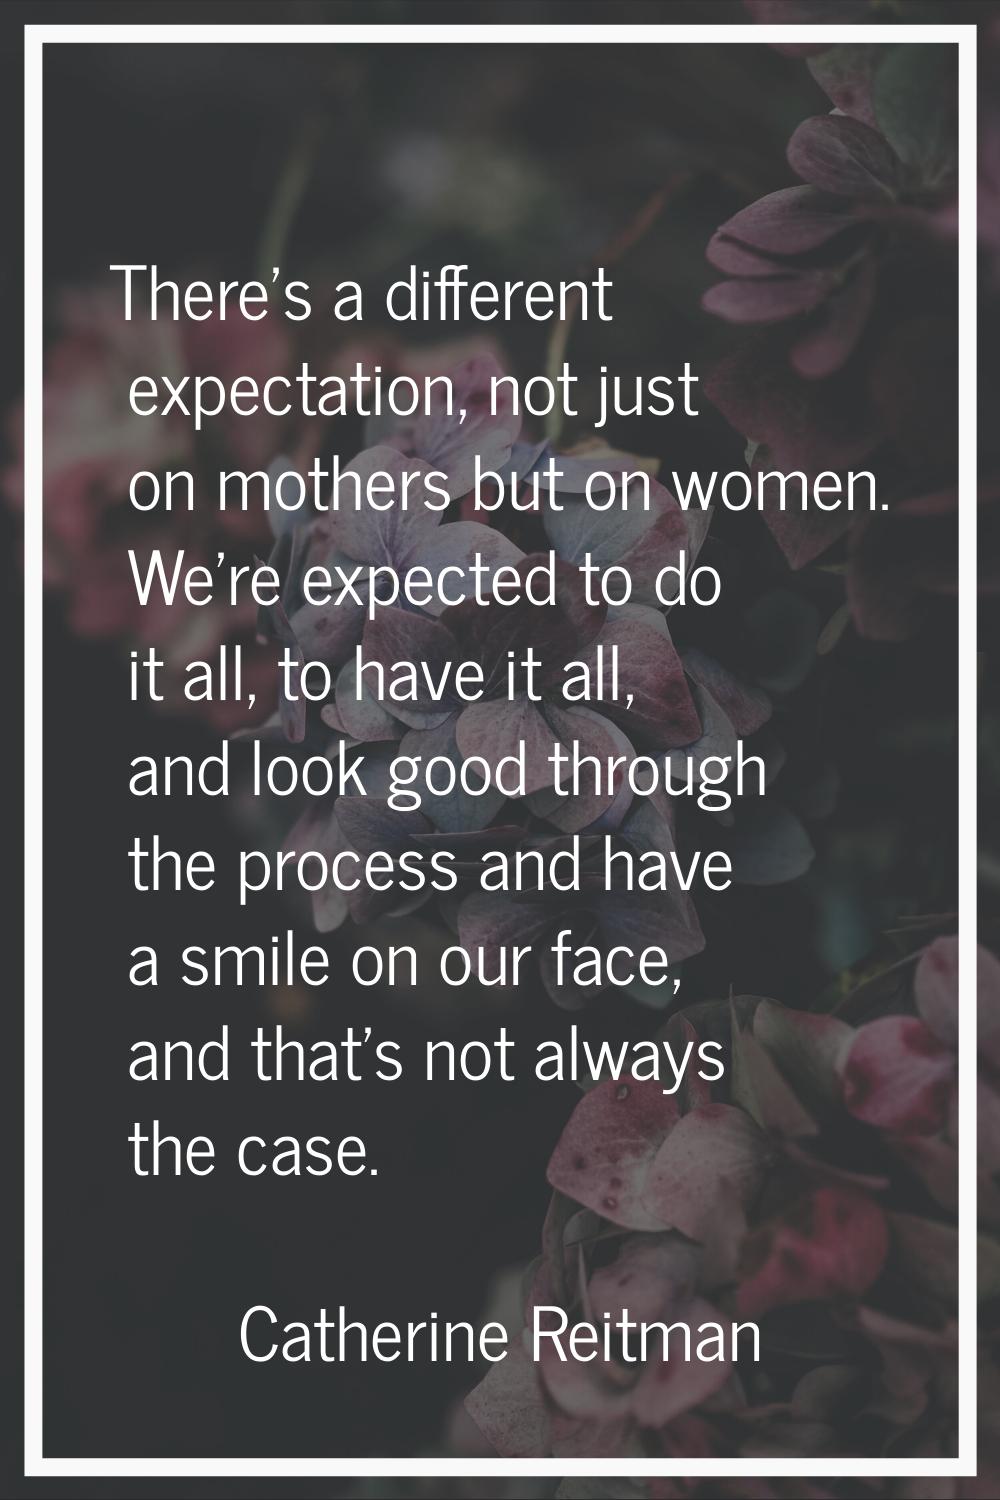 There's a different expectation, not just on mothers but on women. We're expected to do it all, to 